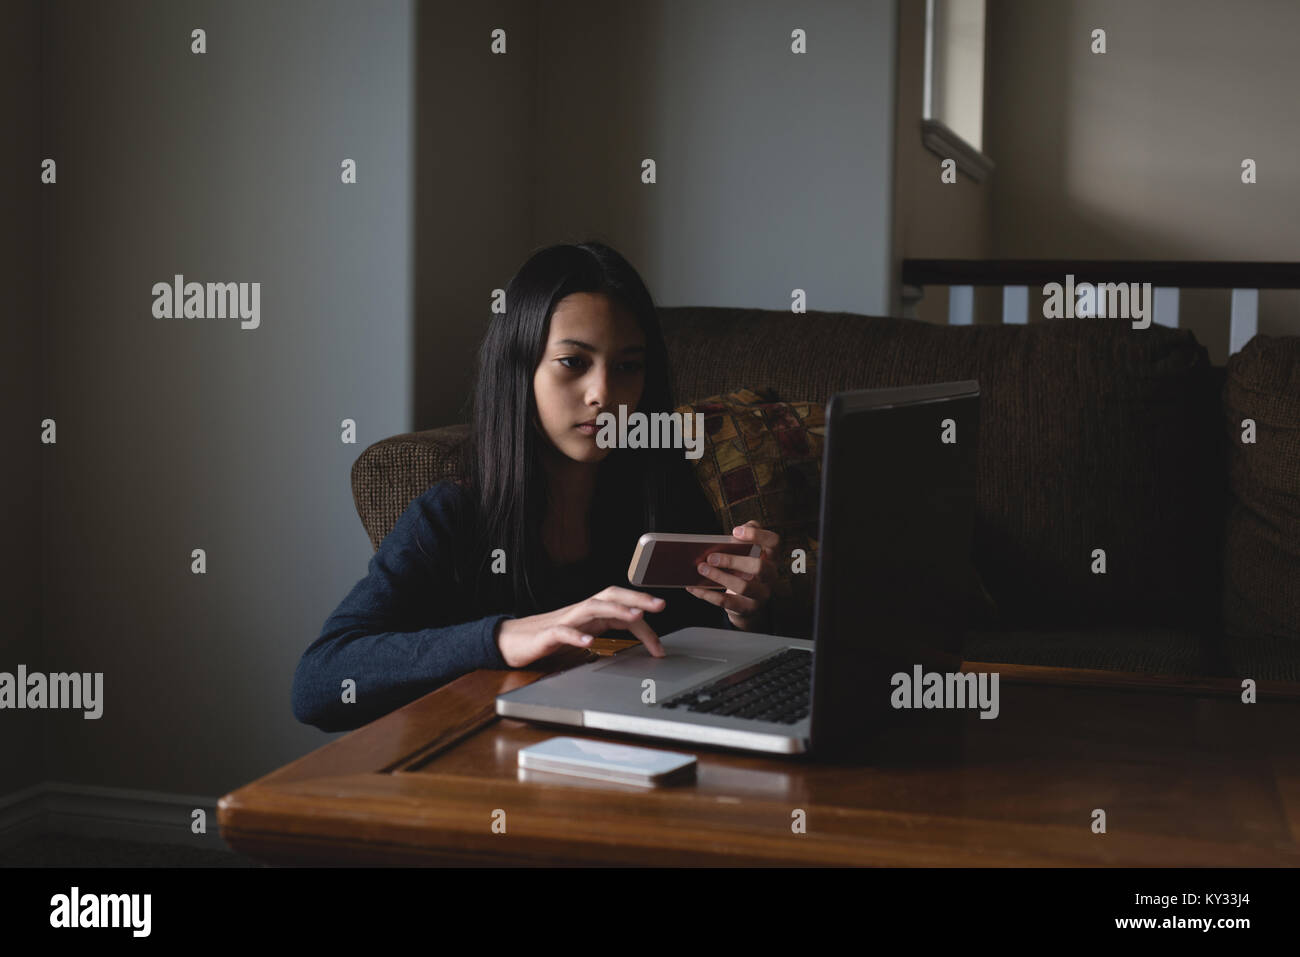 Girl using laptop and mobile phone in living room Stock Photo